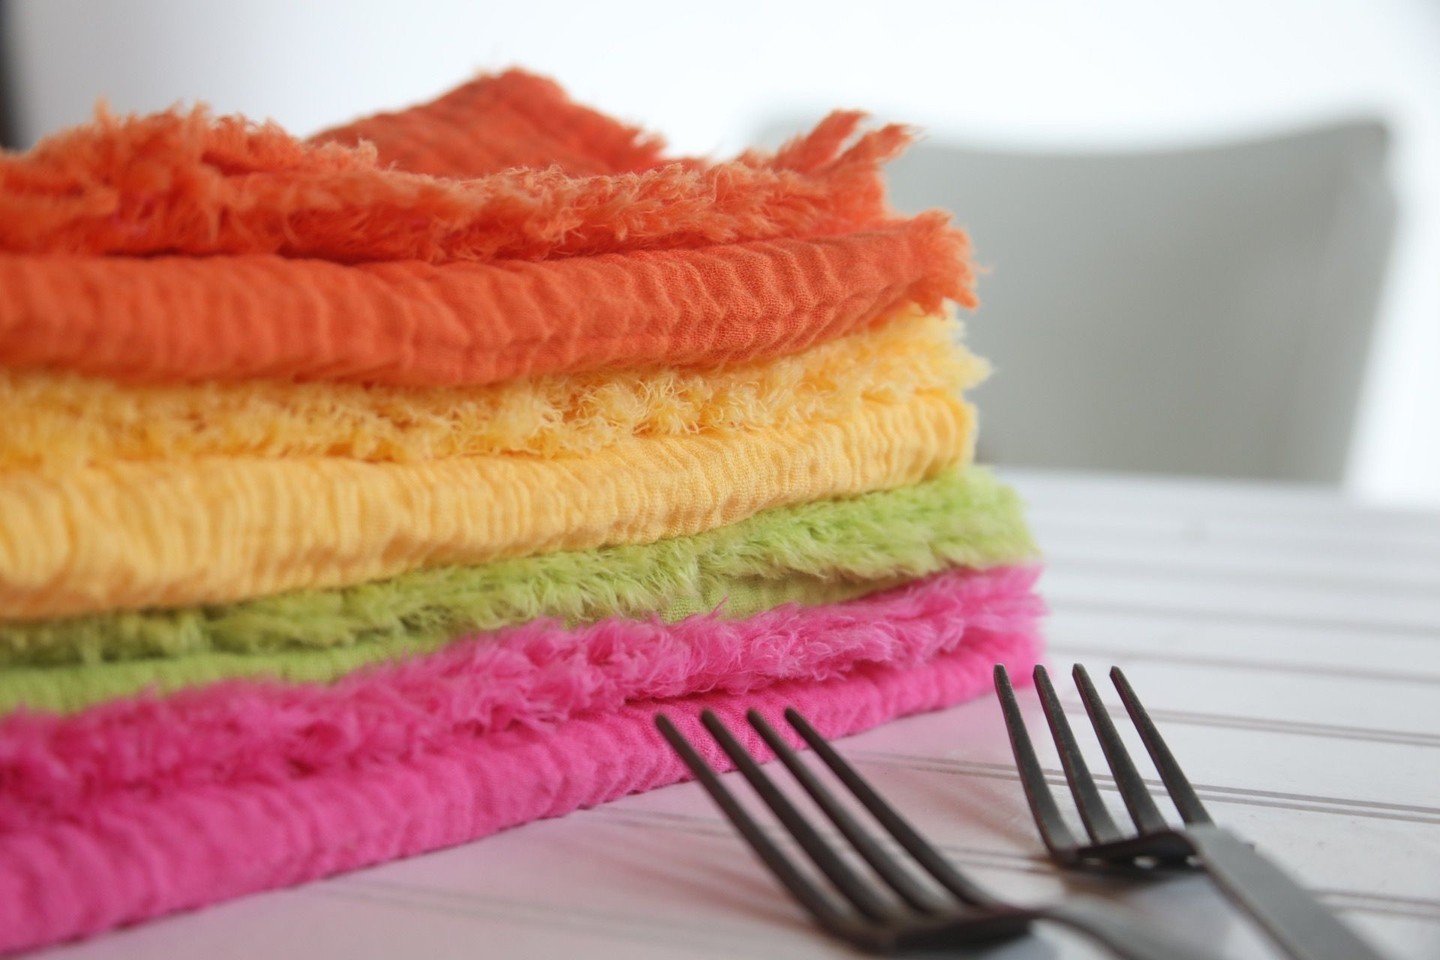 Add a pop of color to your summer table with our bright cotton ripple napkins! ☀️ On sale through Sunday - don't miss out! 🌼 #SummerReady #TableSettingEssentials